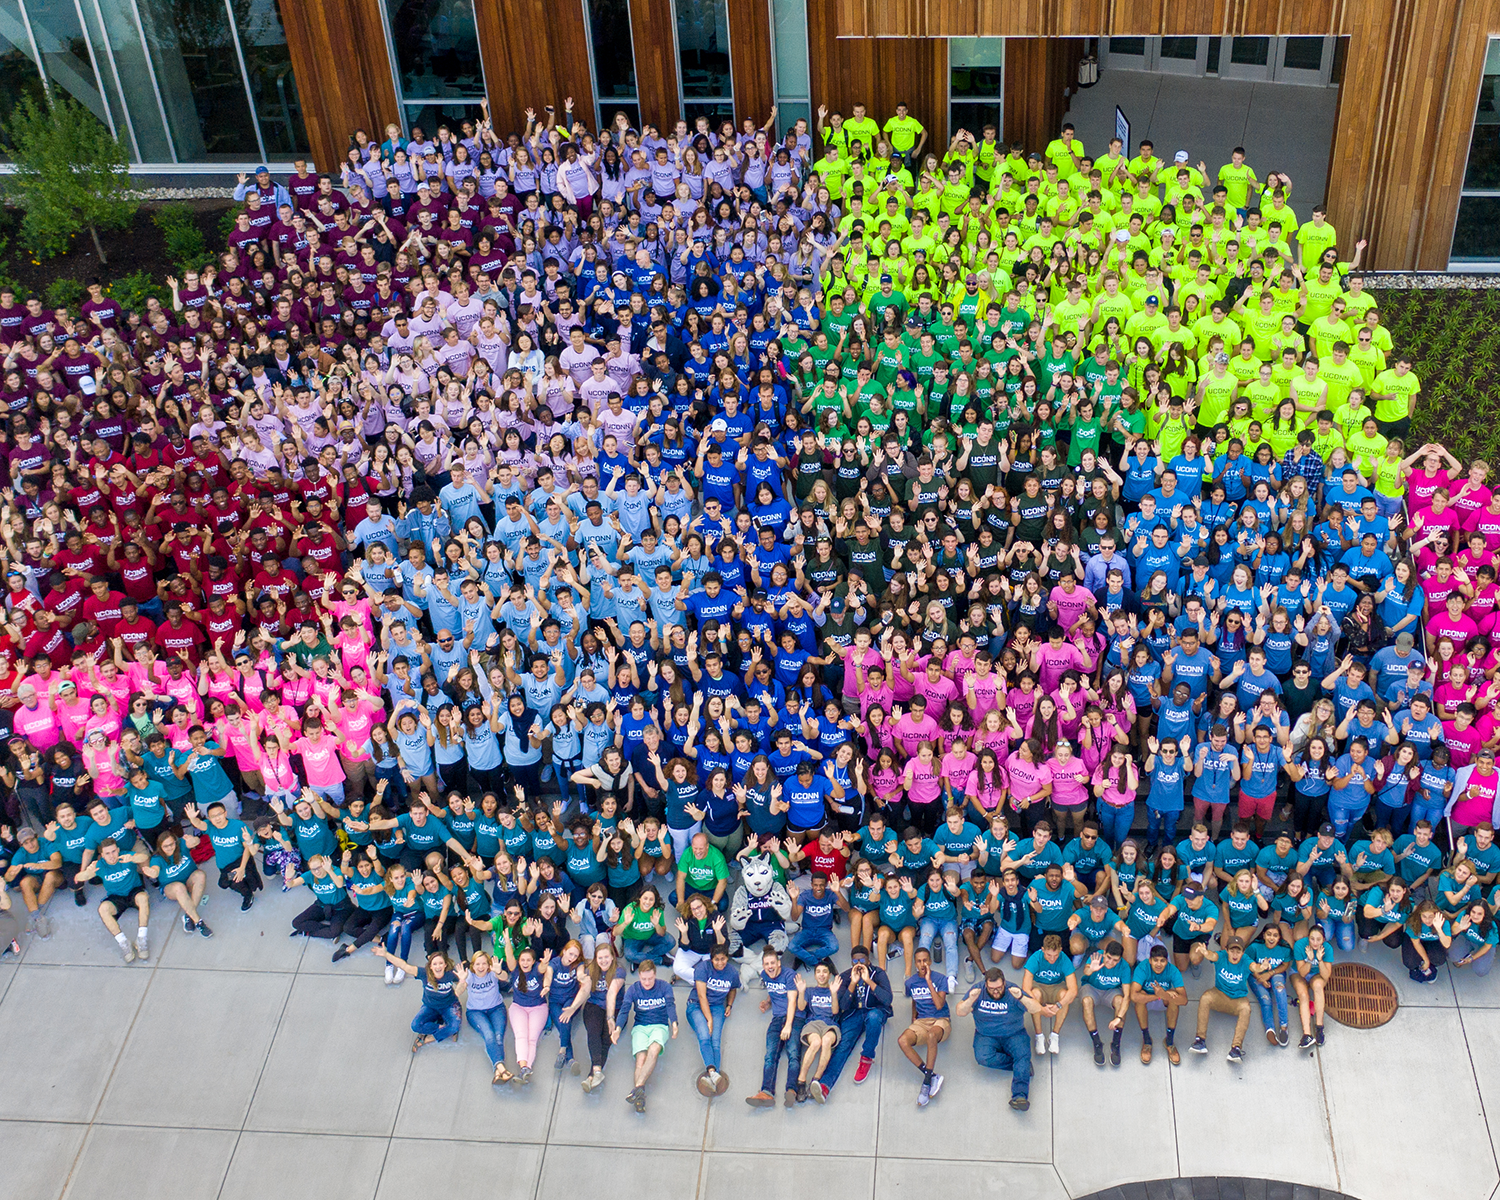 Hundreds of diverse students pose together, many waving at the camera and smiling and grouped into about a dozen sections by matching color-coded shirts that indicate which UConn Learning Community they belong to.